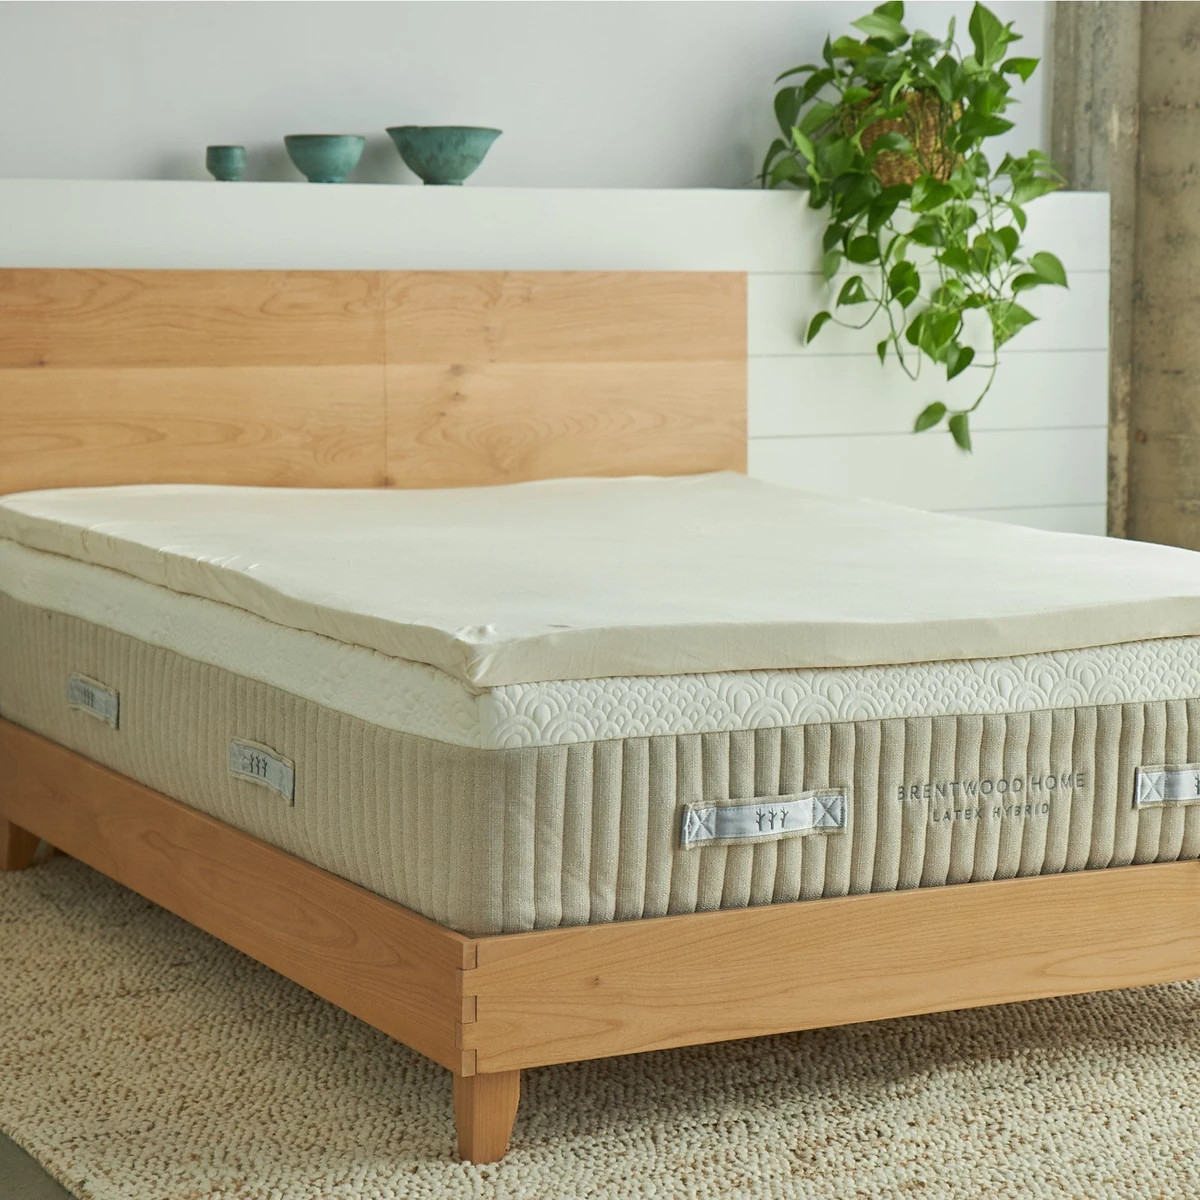 should i get the 2 inch or 3 inch brentwood home mattress topper?